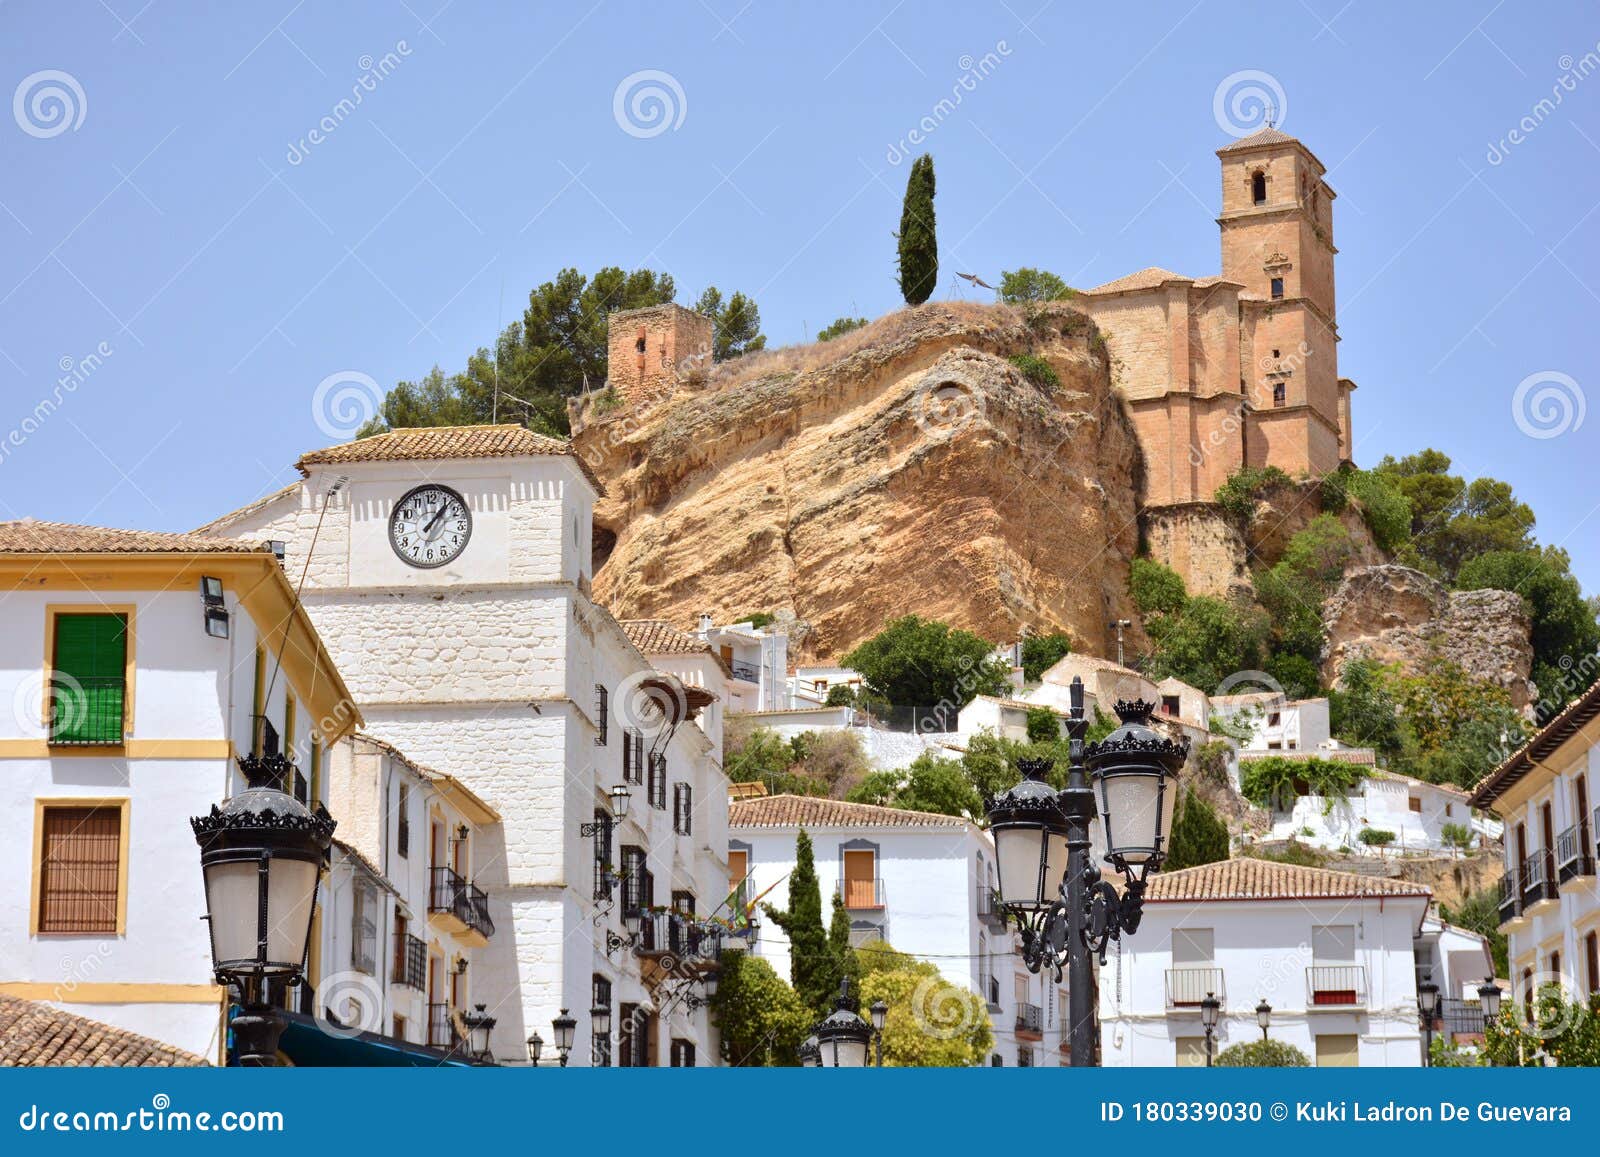 view of the town of montefrÃÂ ÃÂ­o, granada spain